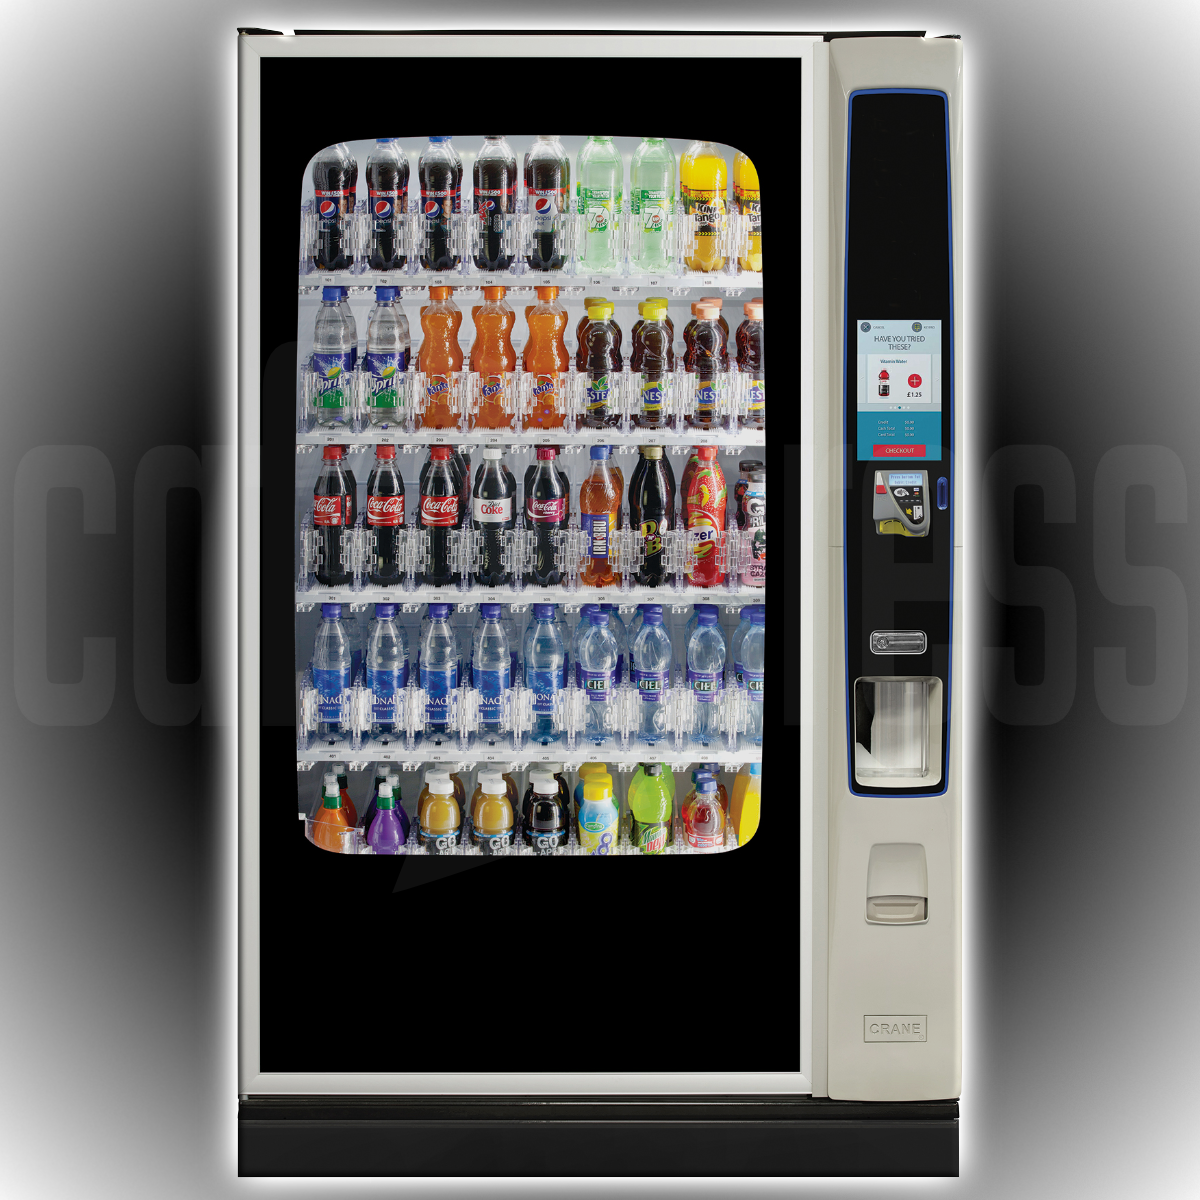 Bevmax 45 Media2 Touch R290 Cold Drink Vending Machine